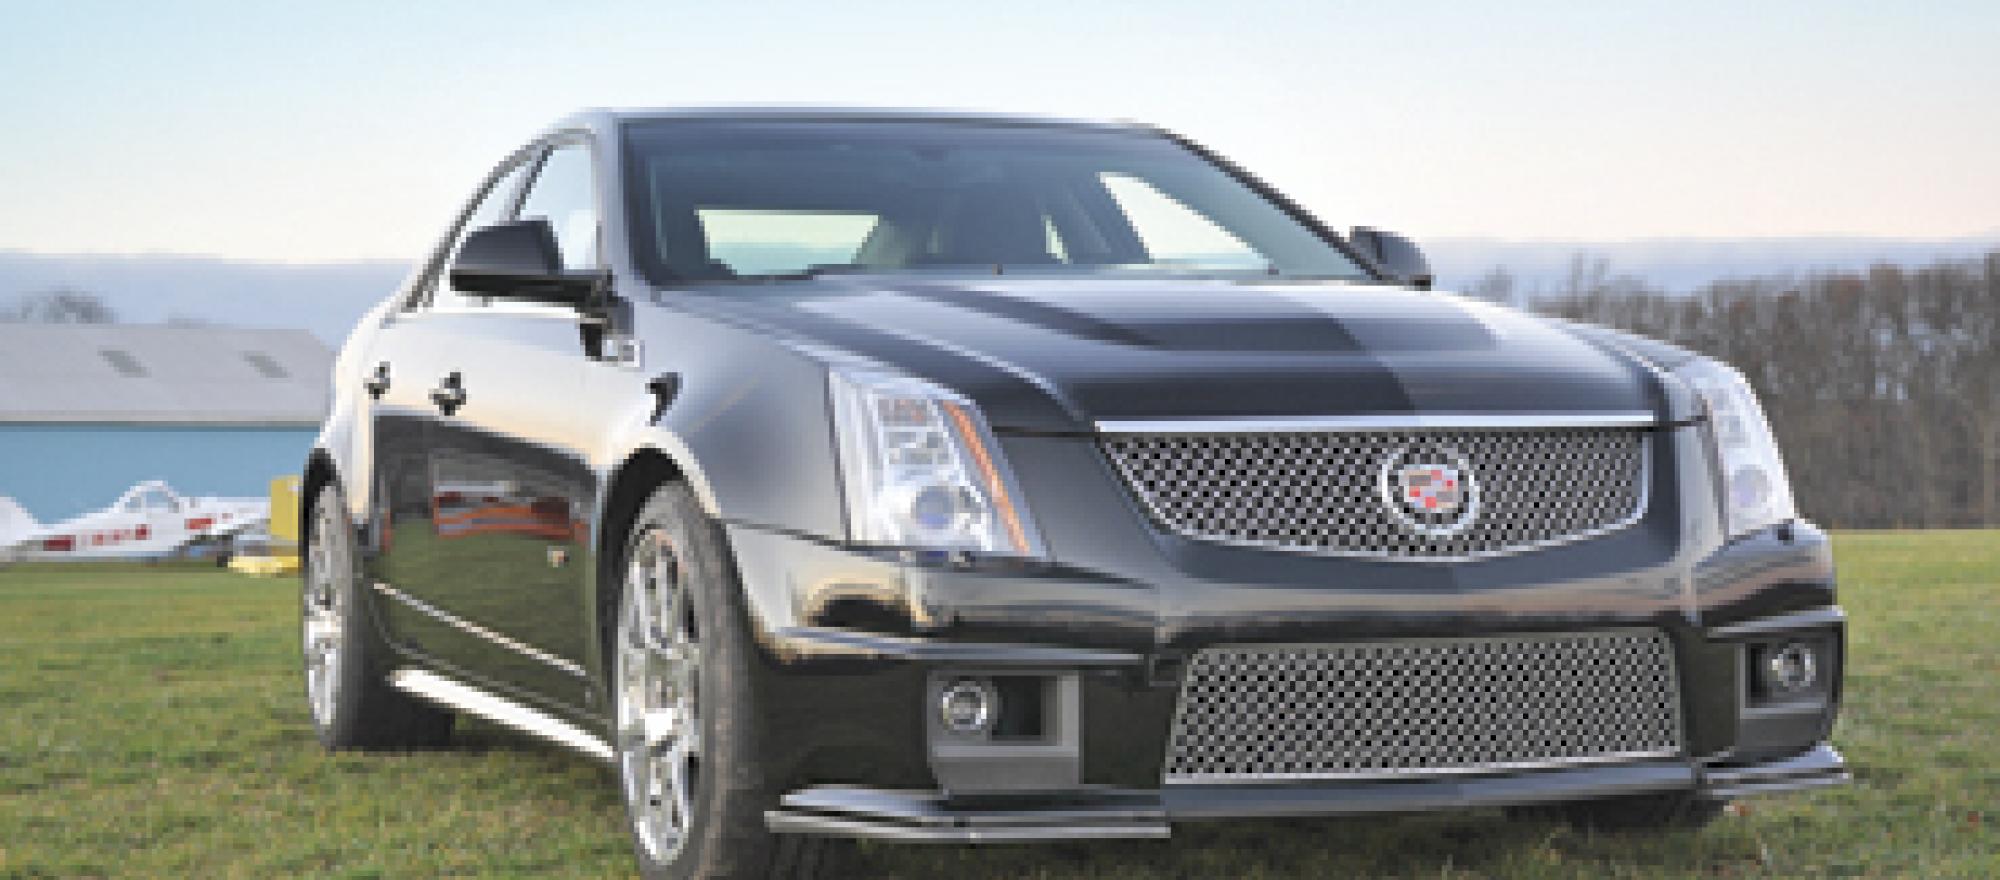 The CTS-V doesn’t quite achieve the fit and finish of a BMW or Mercedes, but 